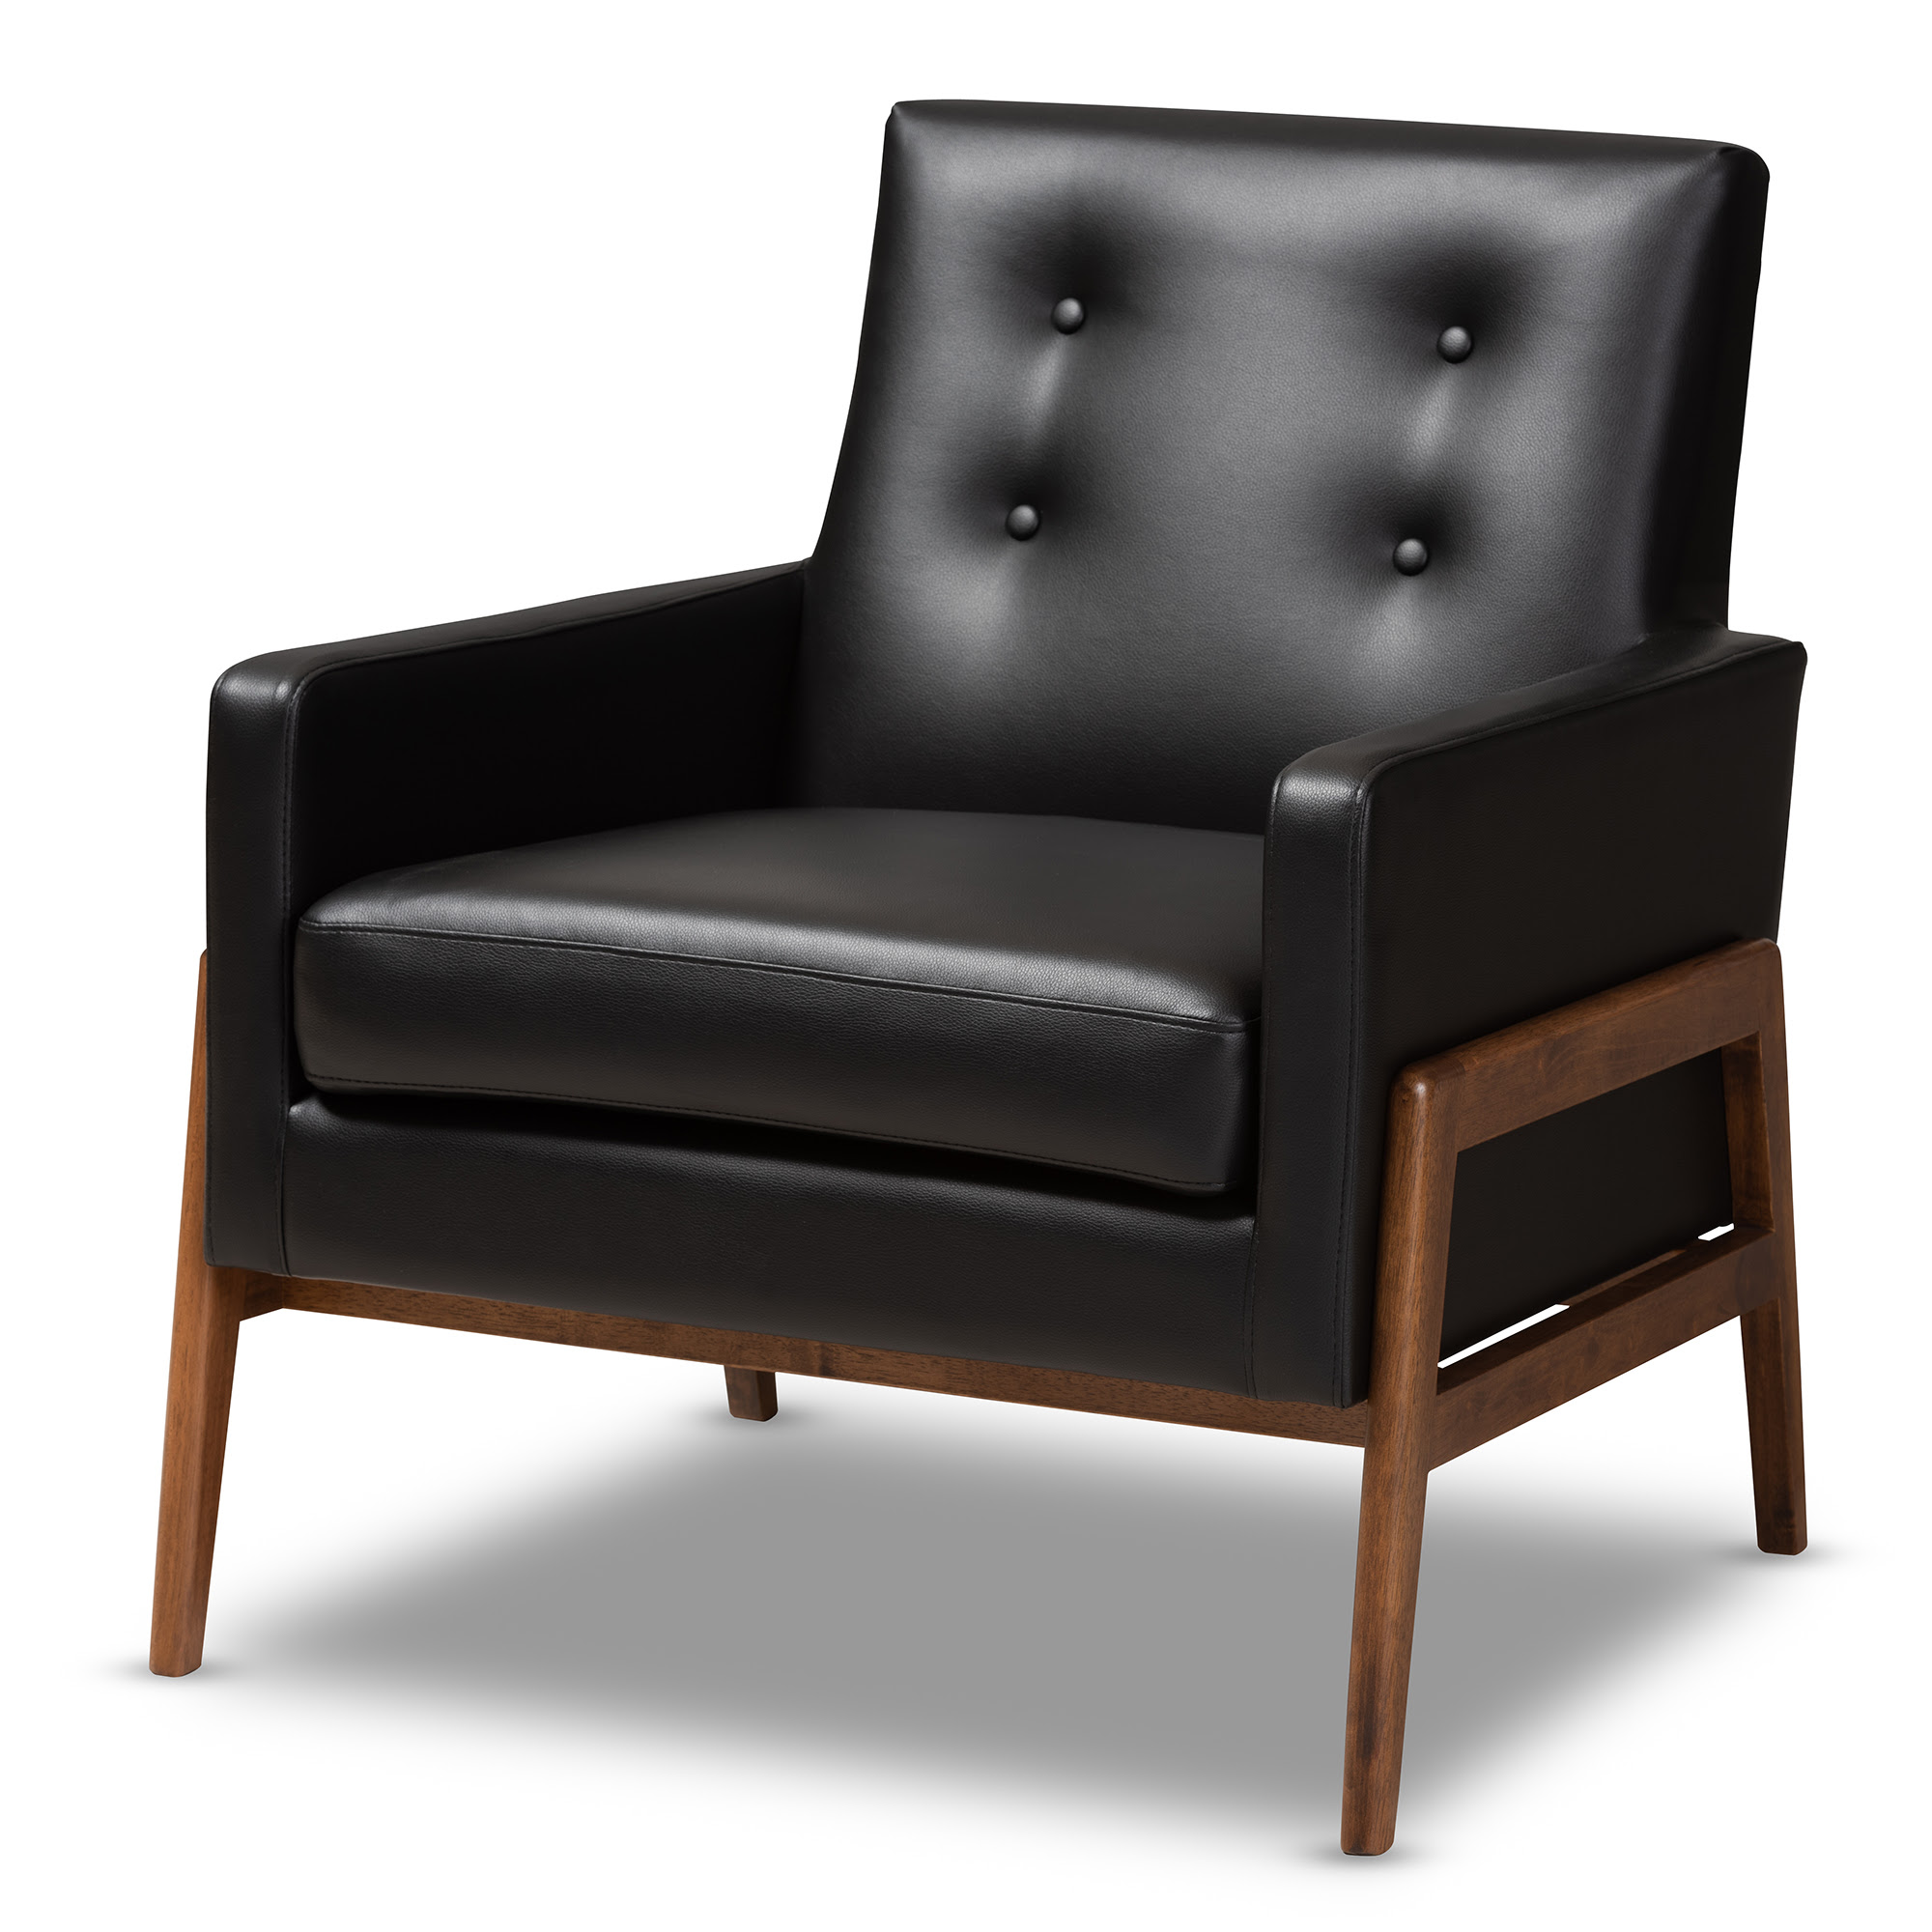 Thanks to the variety of color and style possibilities available, you're limited only by your. Baxton Studio Perris Mid Century Modern Black Faux Leather Upholstered Walnut Wood Lounge Chair